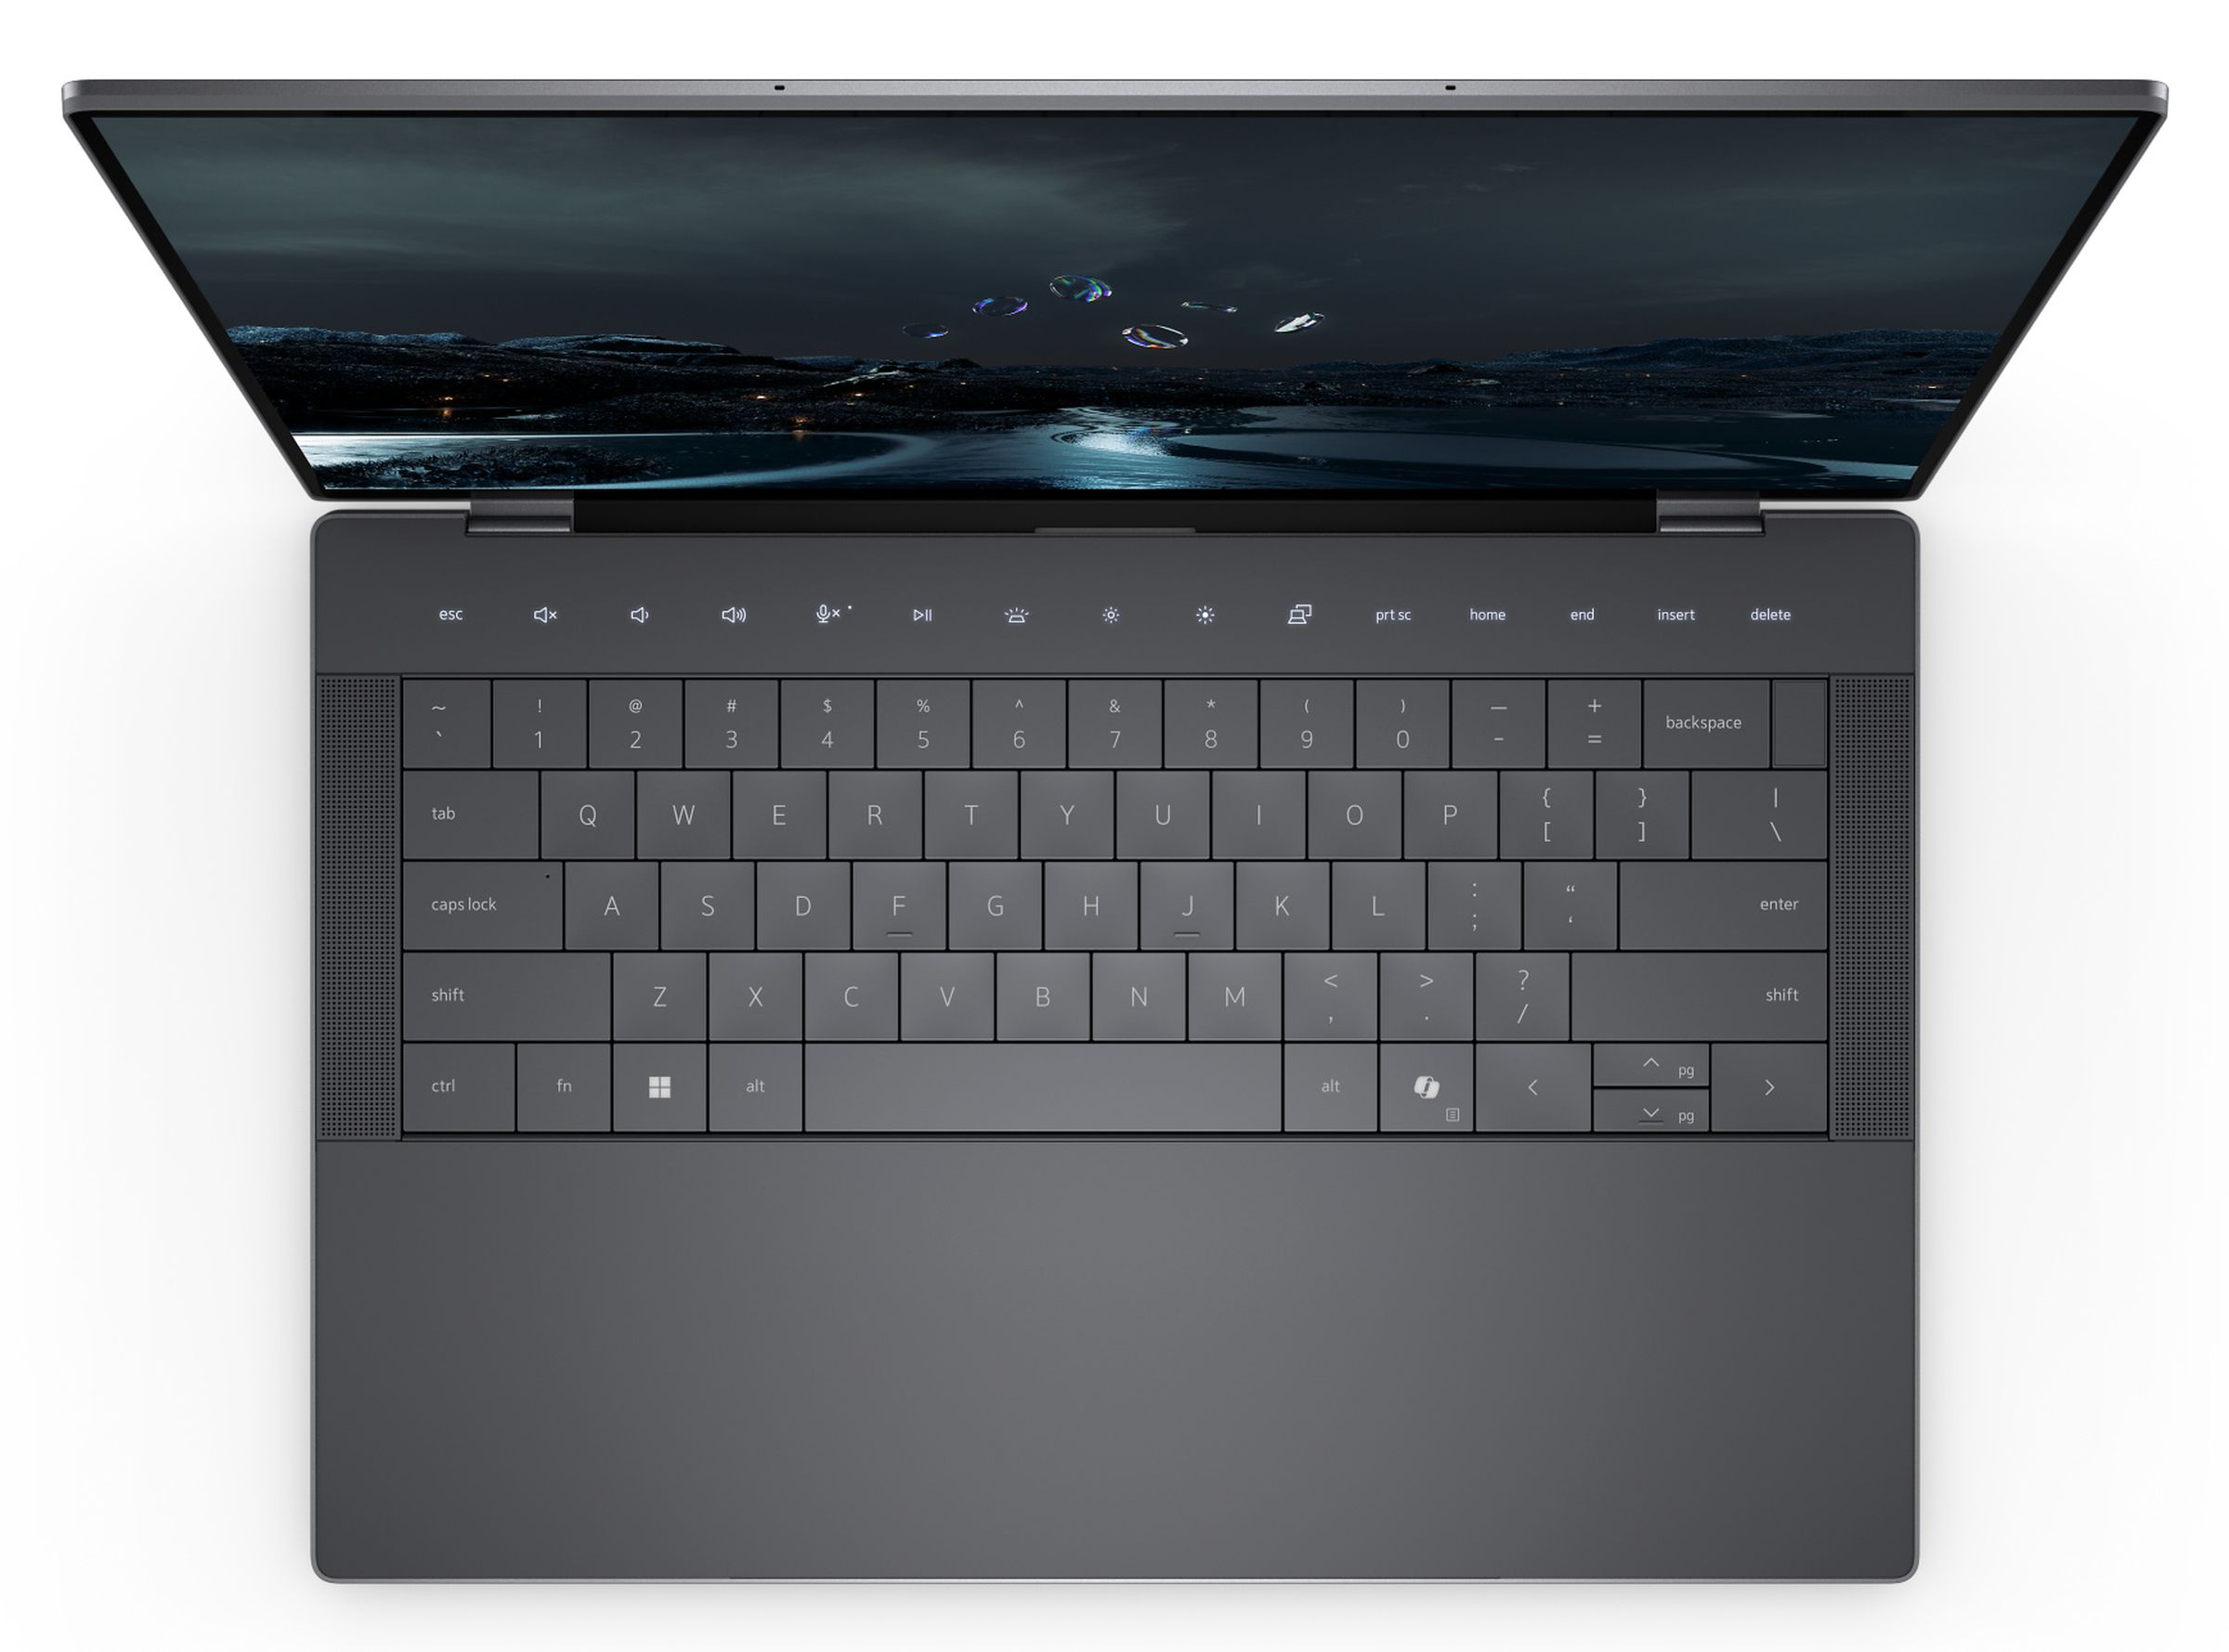 The Copilot key can be seen to the right of the XPS 14’s spacebar.